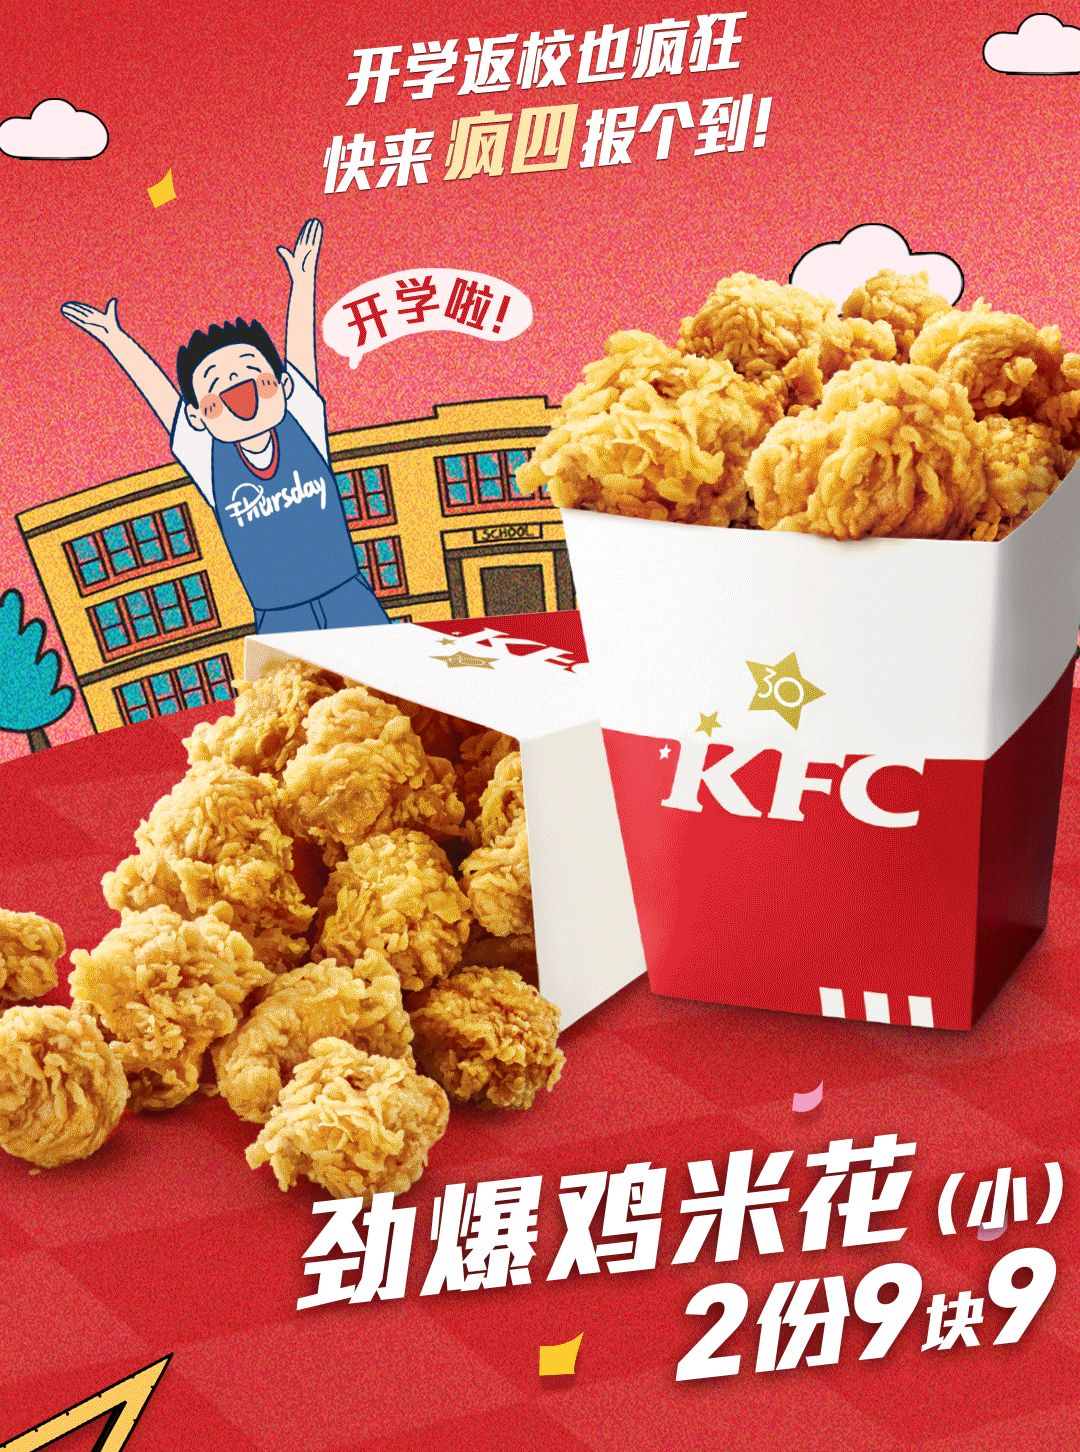 KFC in Naples, opens the king of American fried chicken